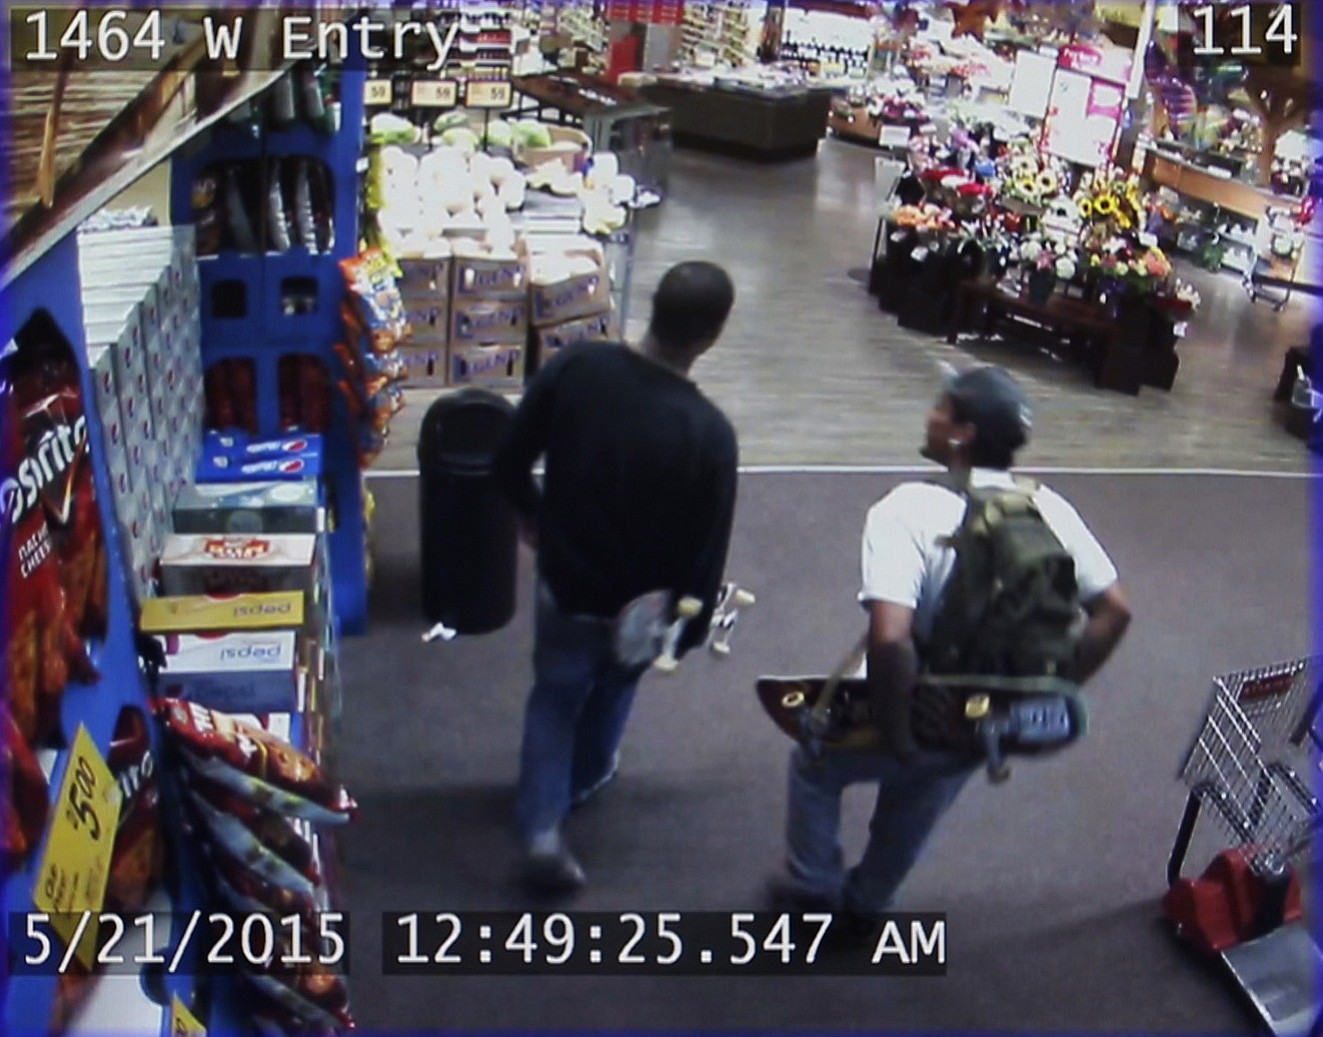 Two men leave a Safeway store May 21 in Olympia. An Olympia police officer responded around 1 a.m.